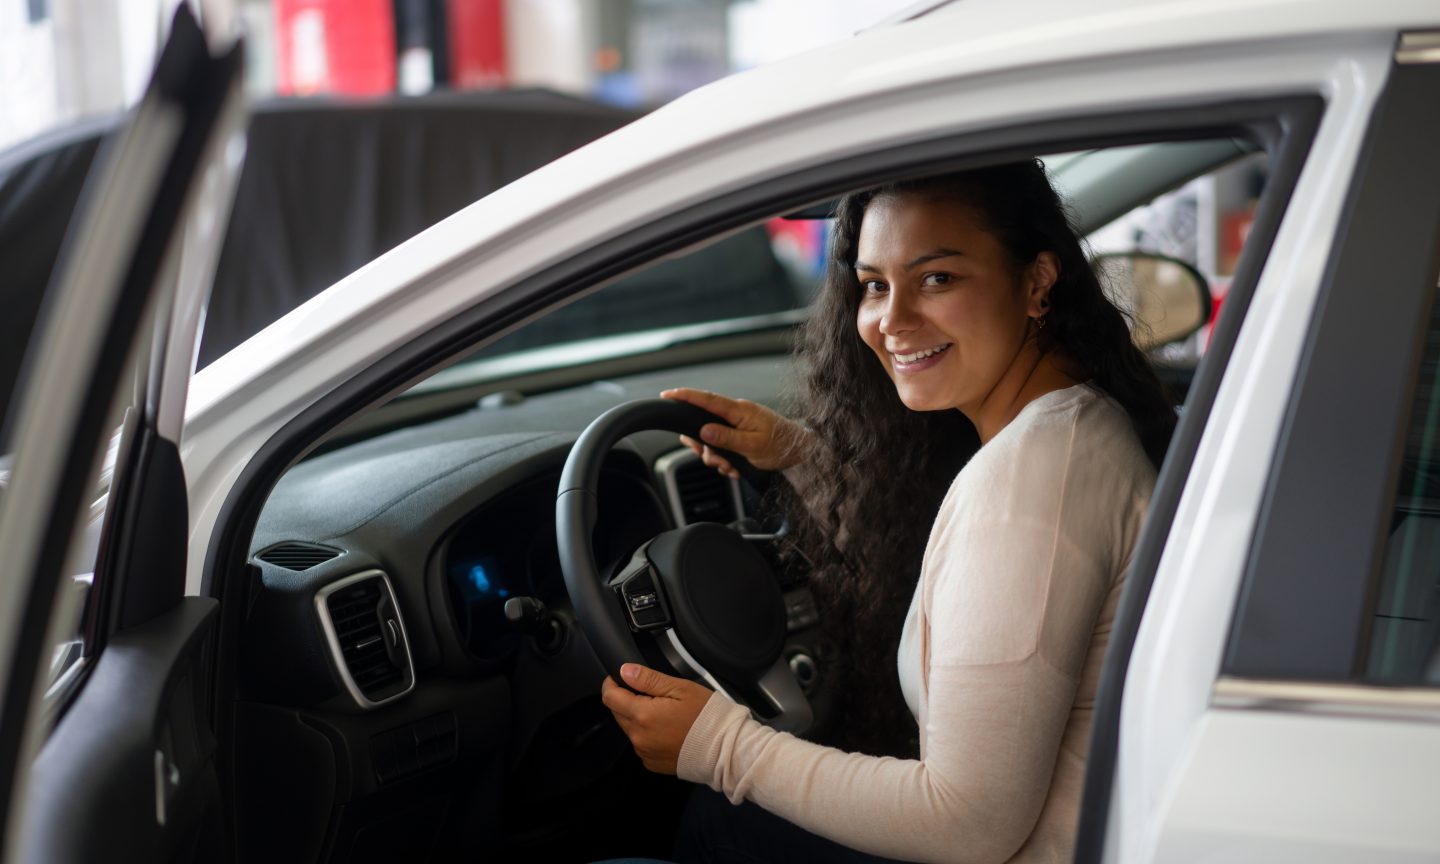 Compare Auto Loans, Rates and Lenders - NerdWallet